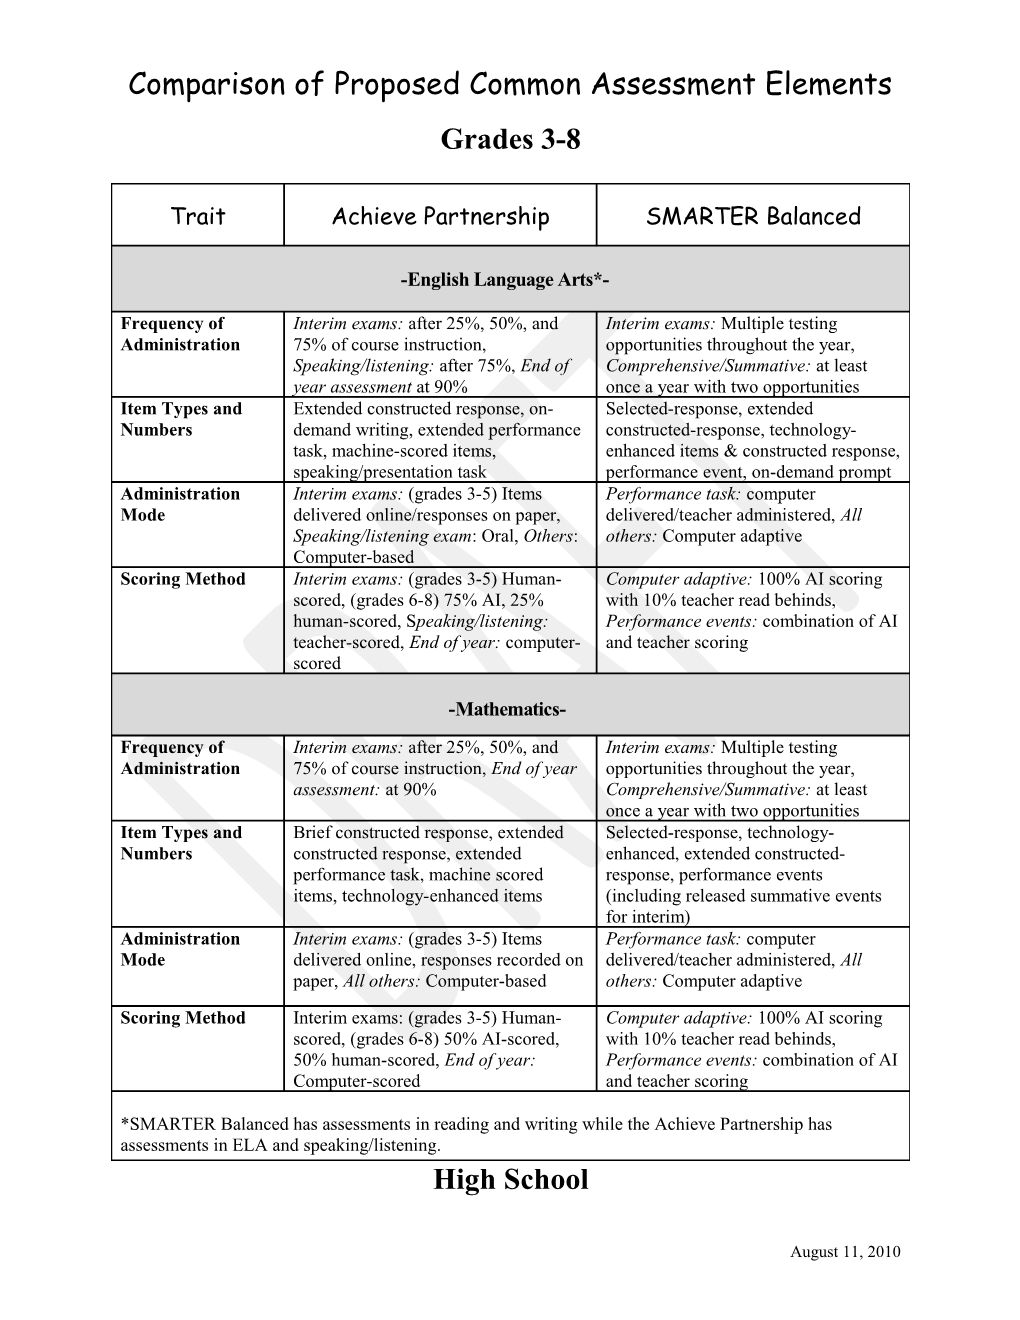 Comparison of Proposed Common Assessment Elements